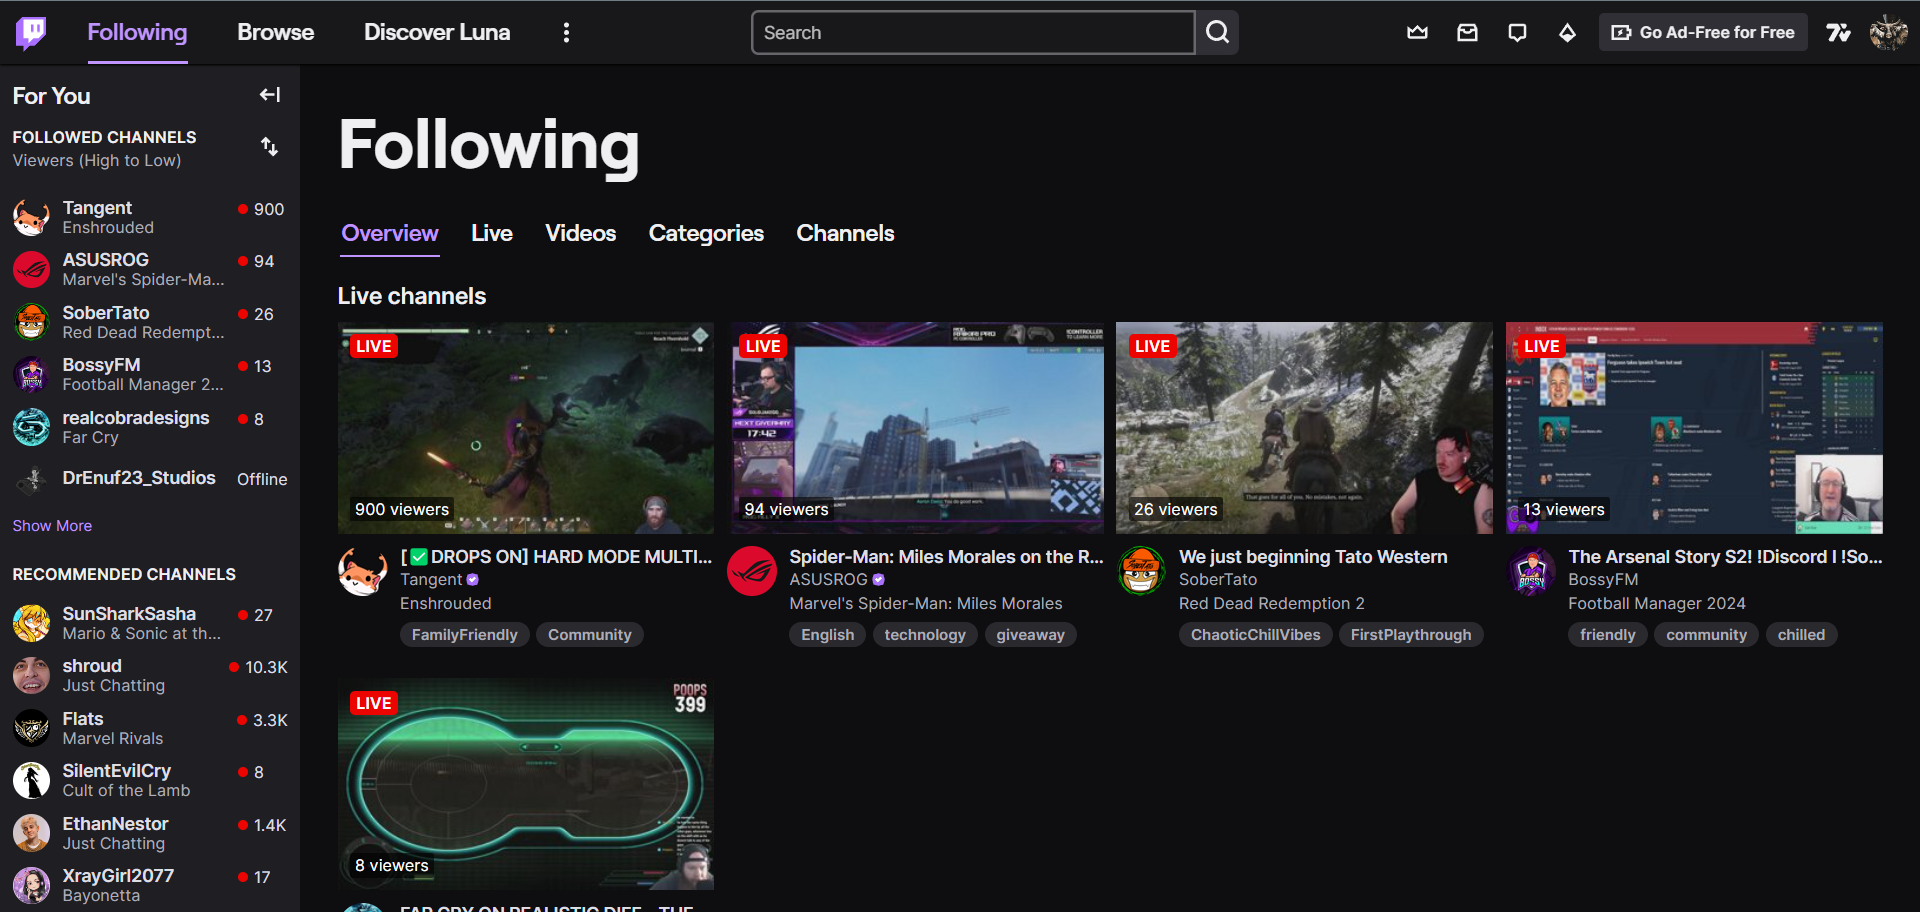 Twitch's "Following" page with the For You menu expanded.